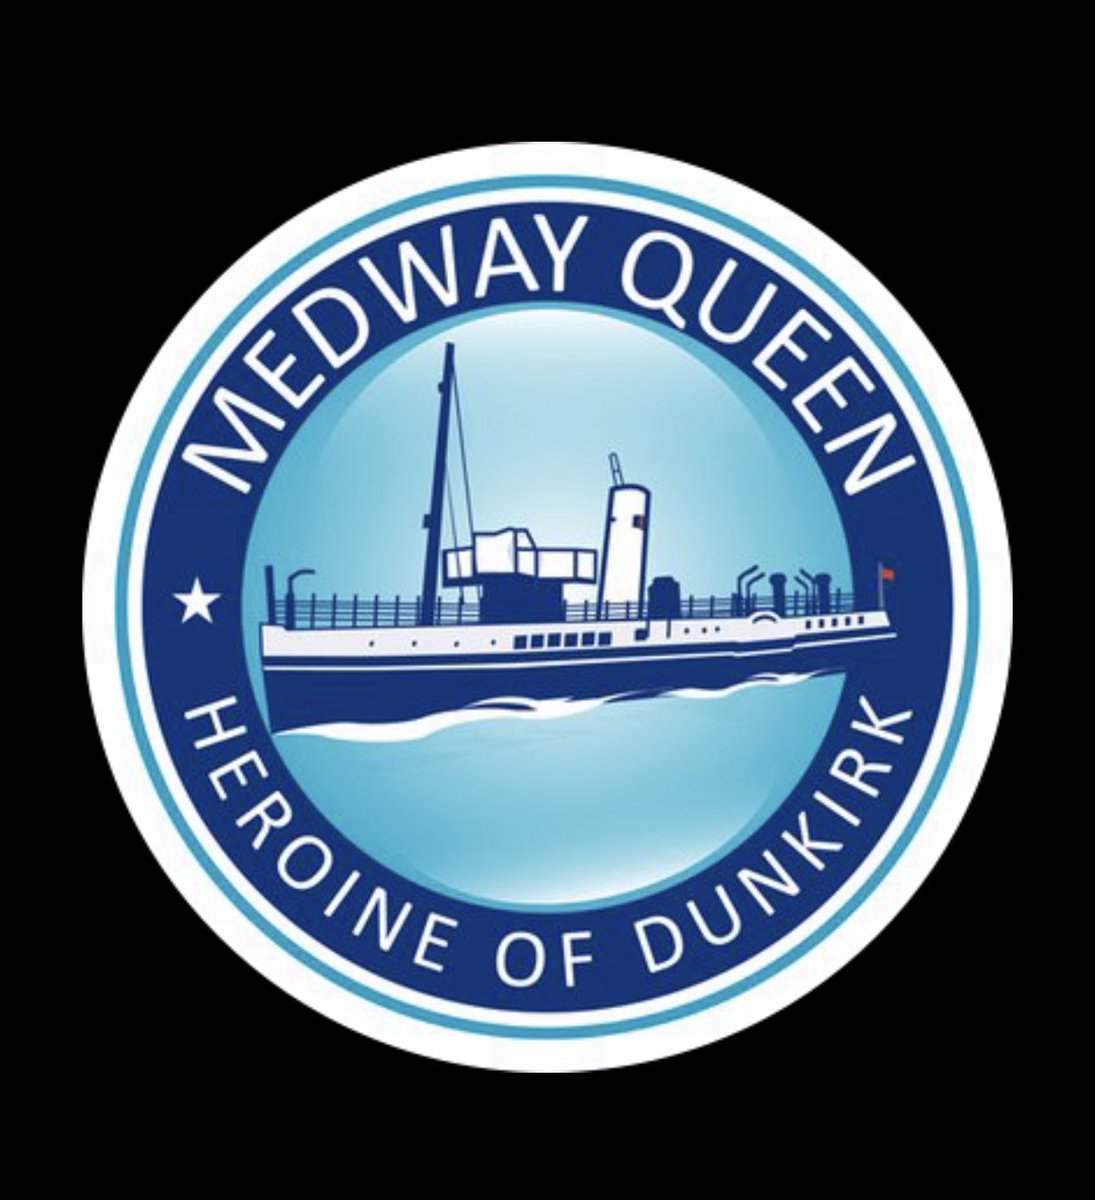 #MedwayQueenPreservationSociety have worked very hard to restore the historic paddle steamer also known as #HeroineOfDunkirk. Fundraising efforts are ongoing to see her cruising on #RiverMedway for the Centenary next year.Please support this gallant effort
medwayqueen.co.uk